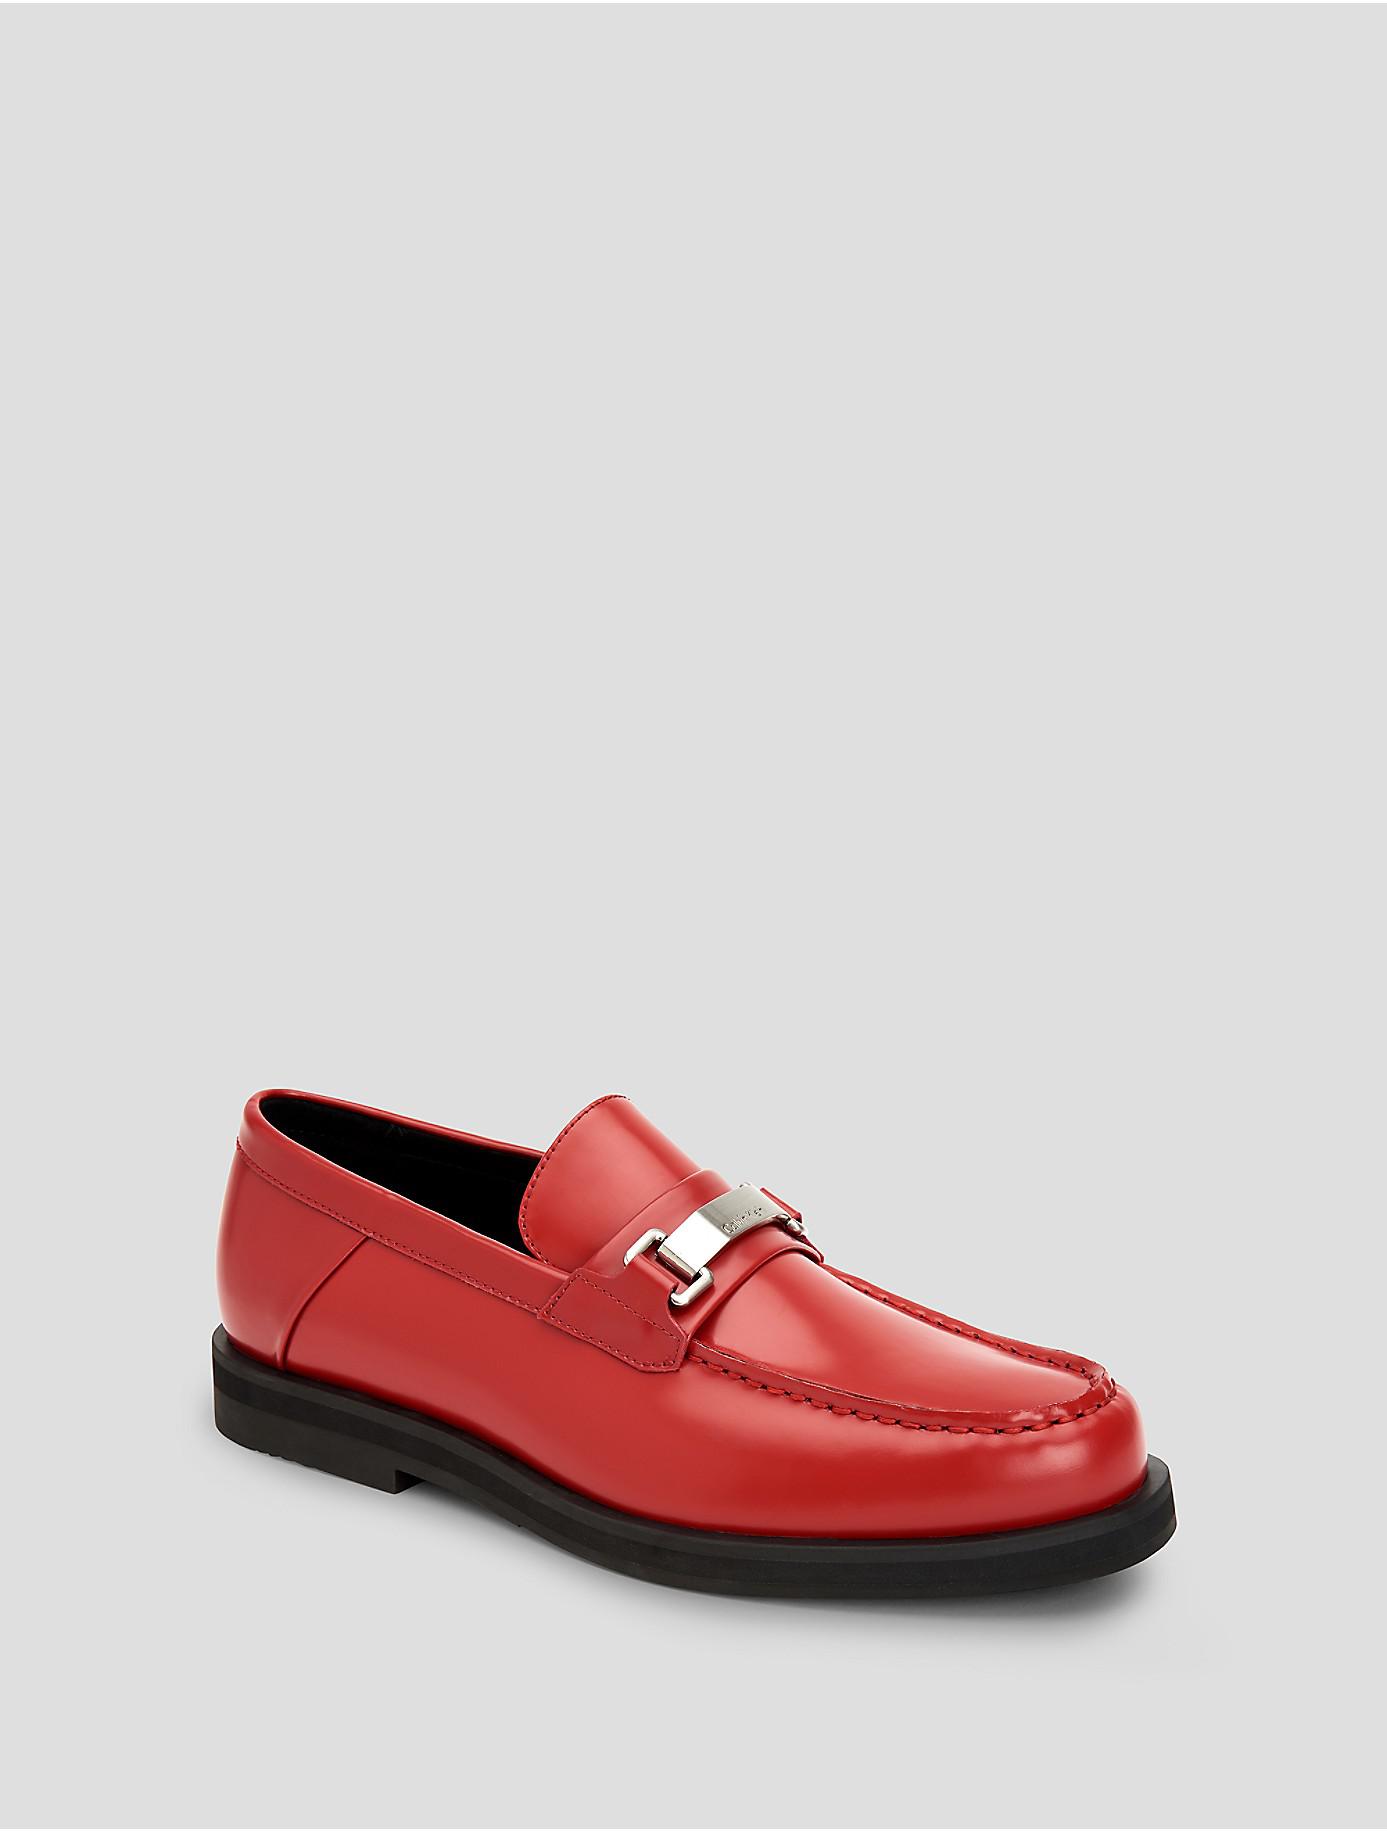 CALVIN KLEIN 205W39NYC Lyric Leather Loafer in Brick Red (Red) for Men -  Lyst